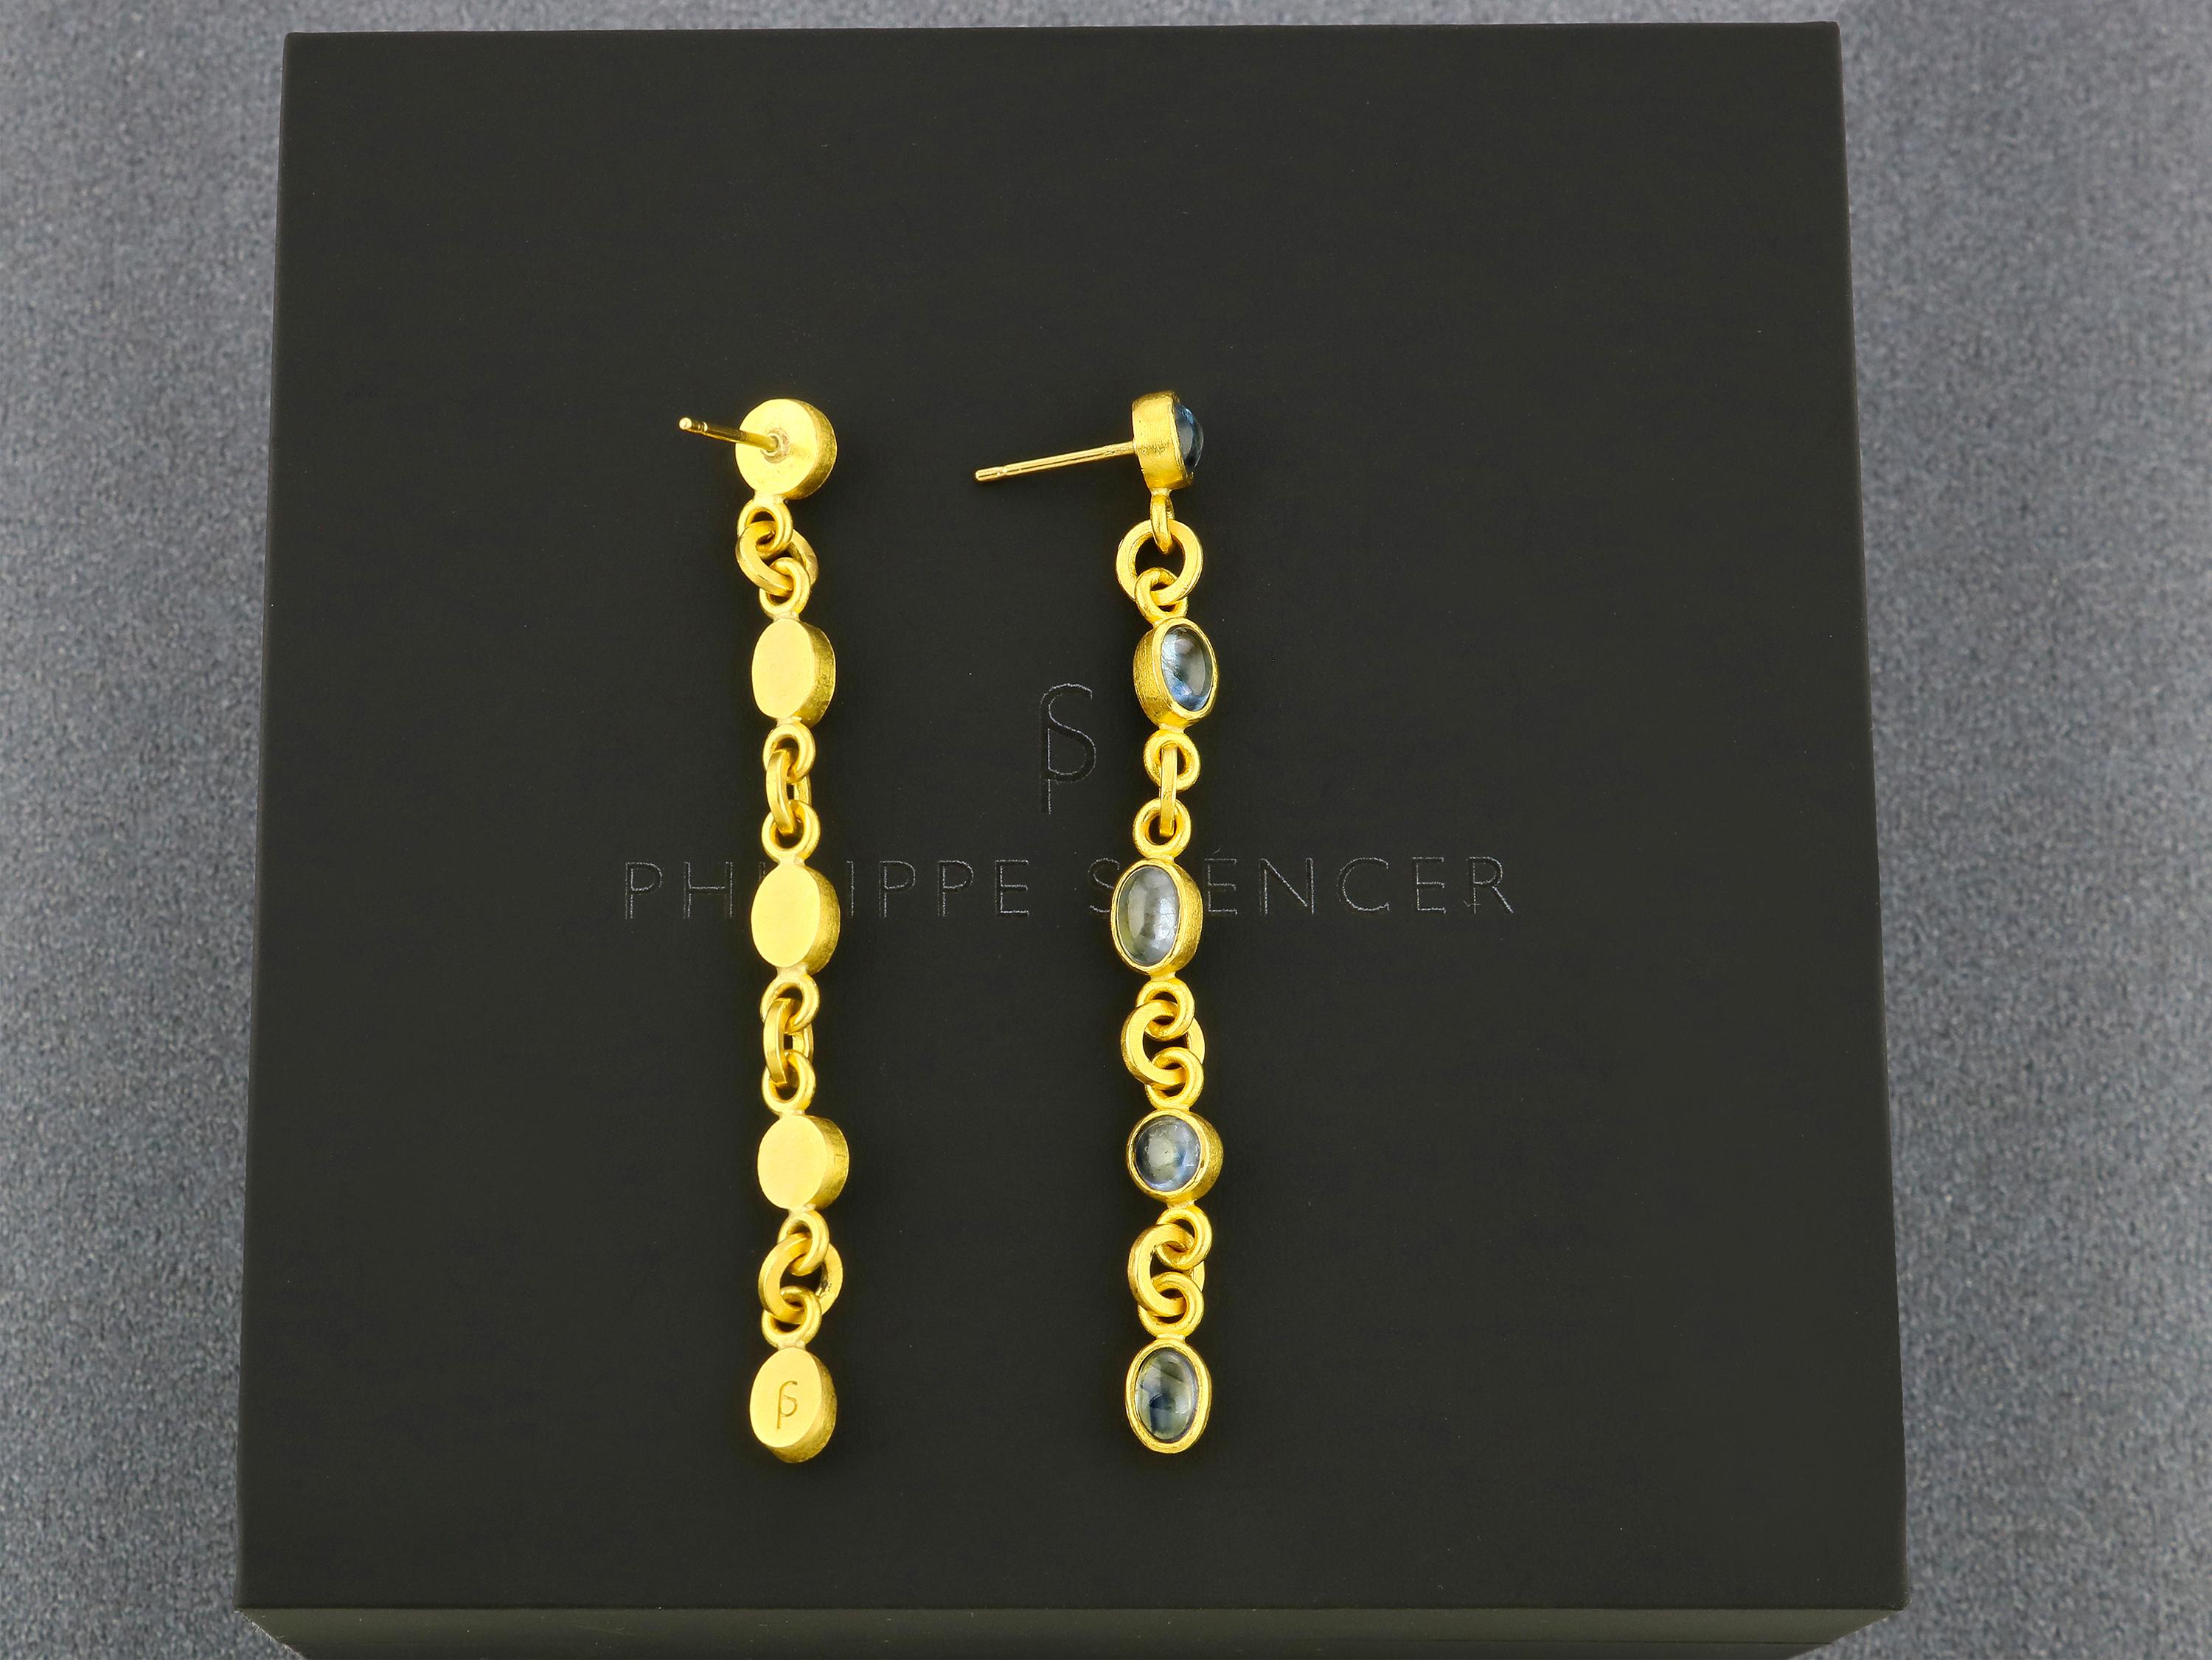 PHILIPPE SPENCER - 7.97 Ct. Total Fancy-Color Cabochon Sapphire Statement Earrings. Each Sapphire is set in Pure 22K Gold with Solid 20K Gold Connection Links. 18K Post Back & Friction Nut for durability. An authentically Hand-Forged & Unique